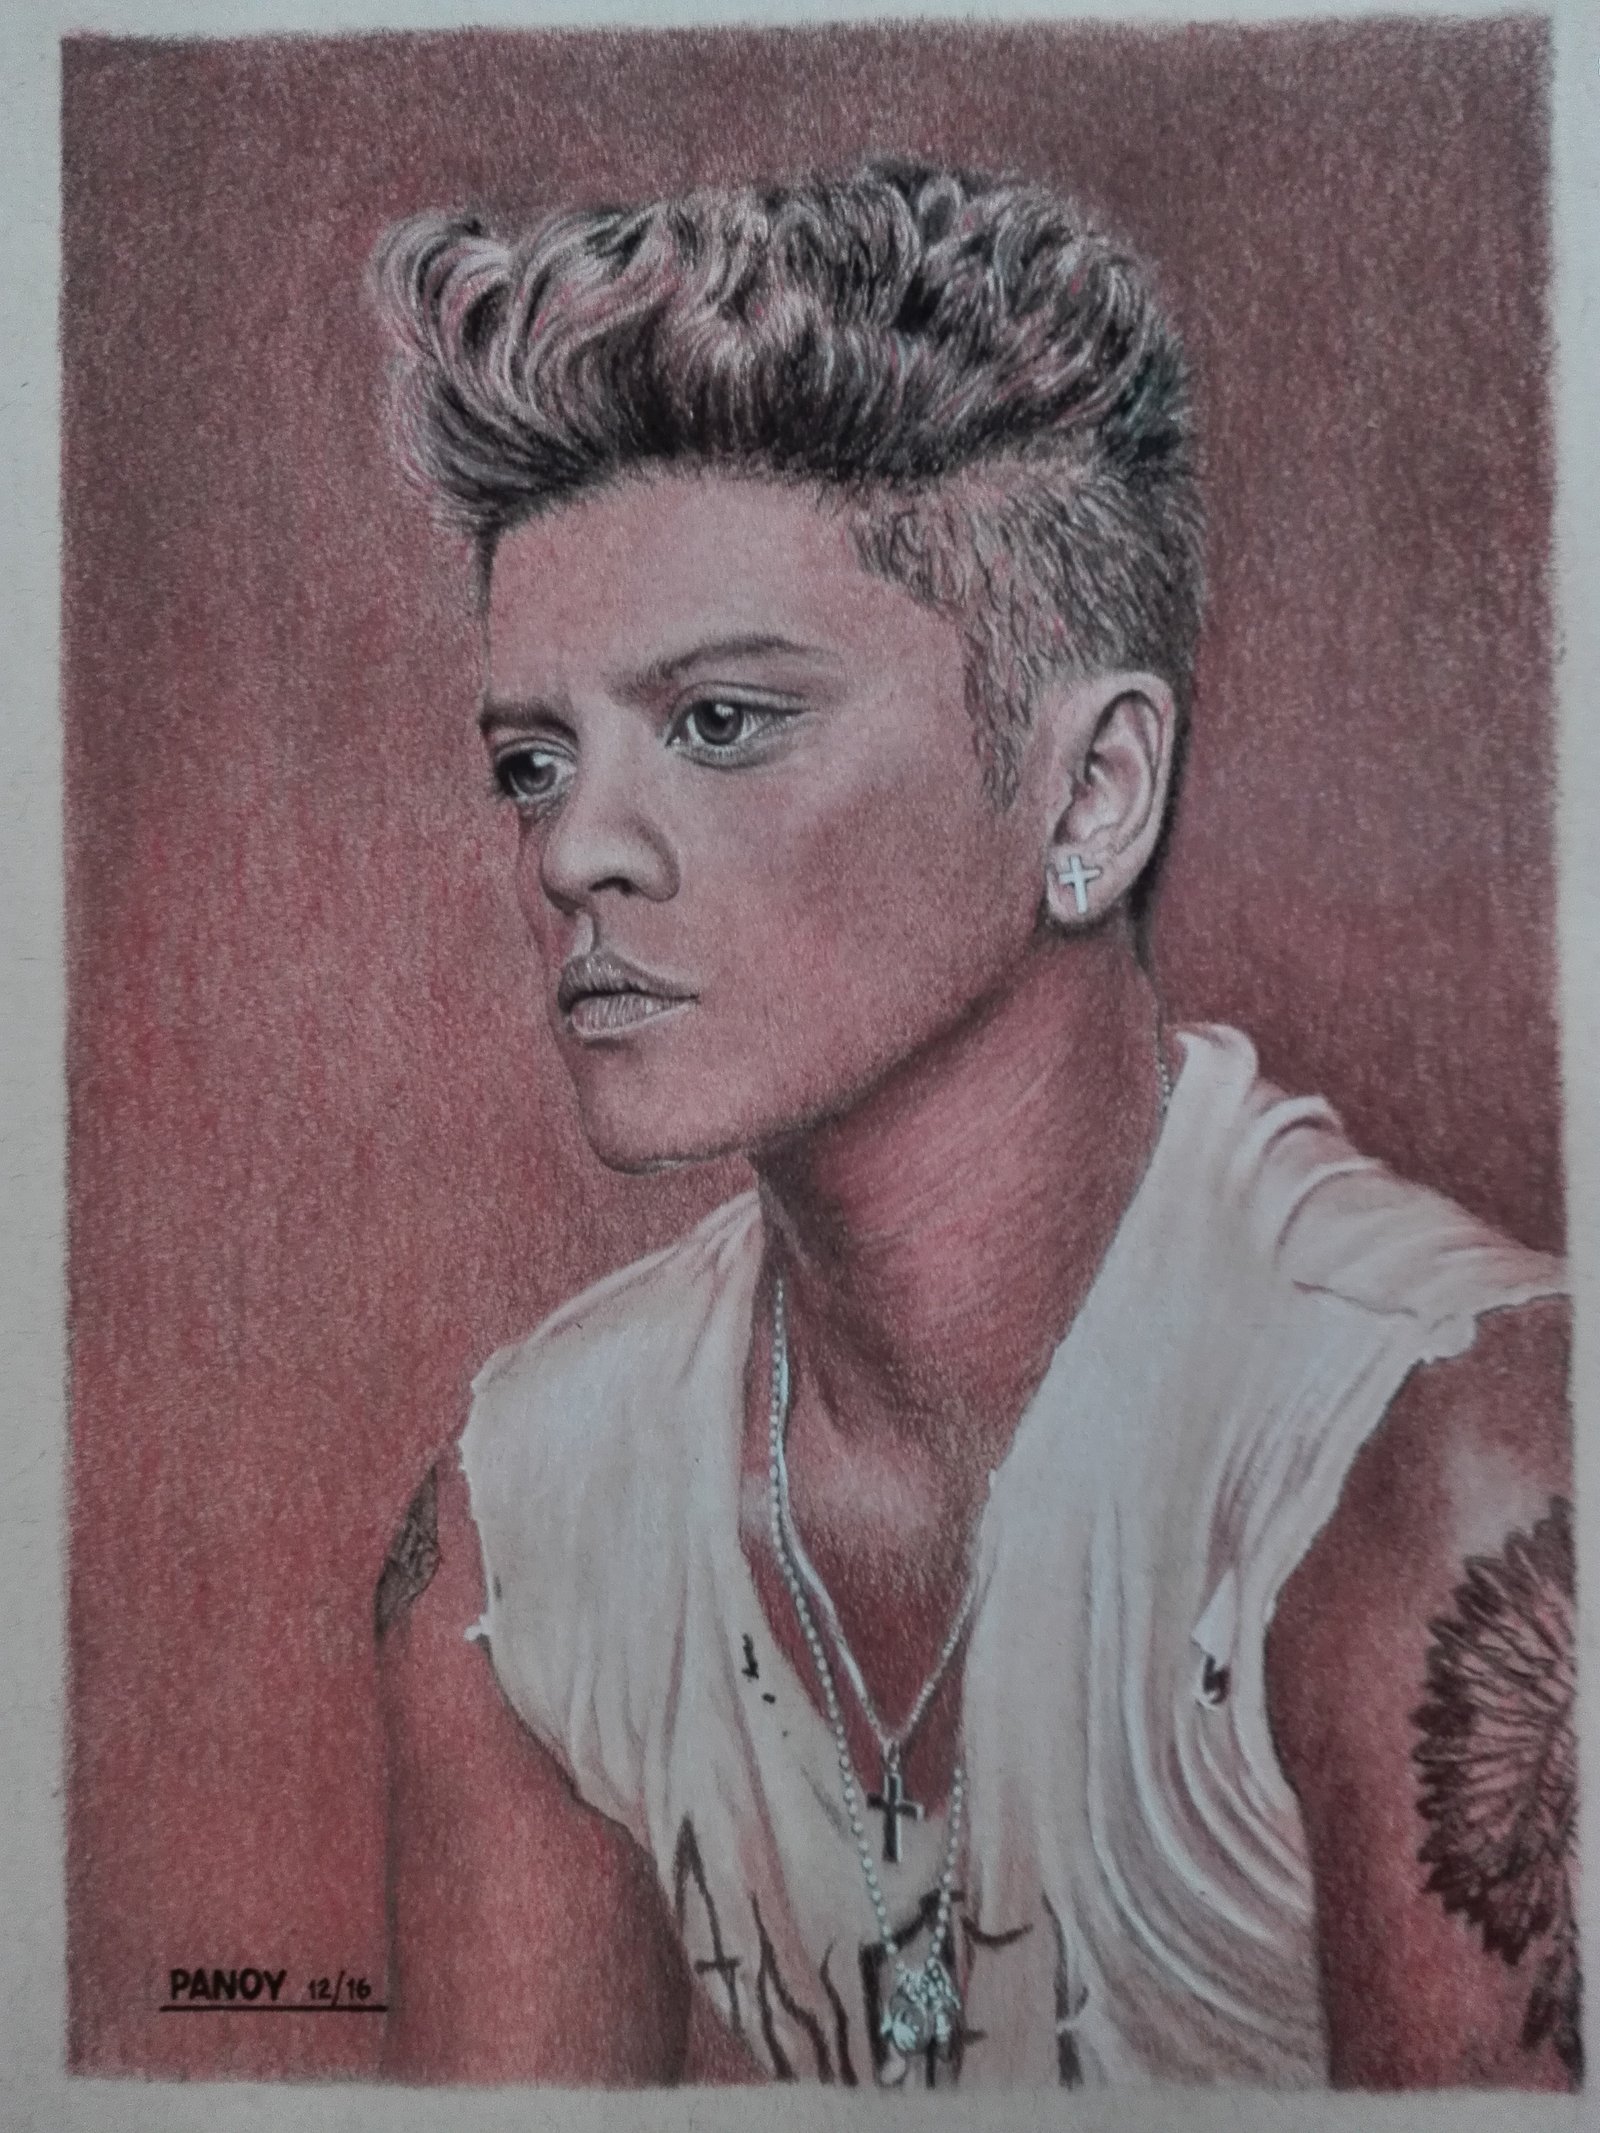 Bruno Mars on coloured charcoal pencils